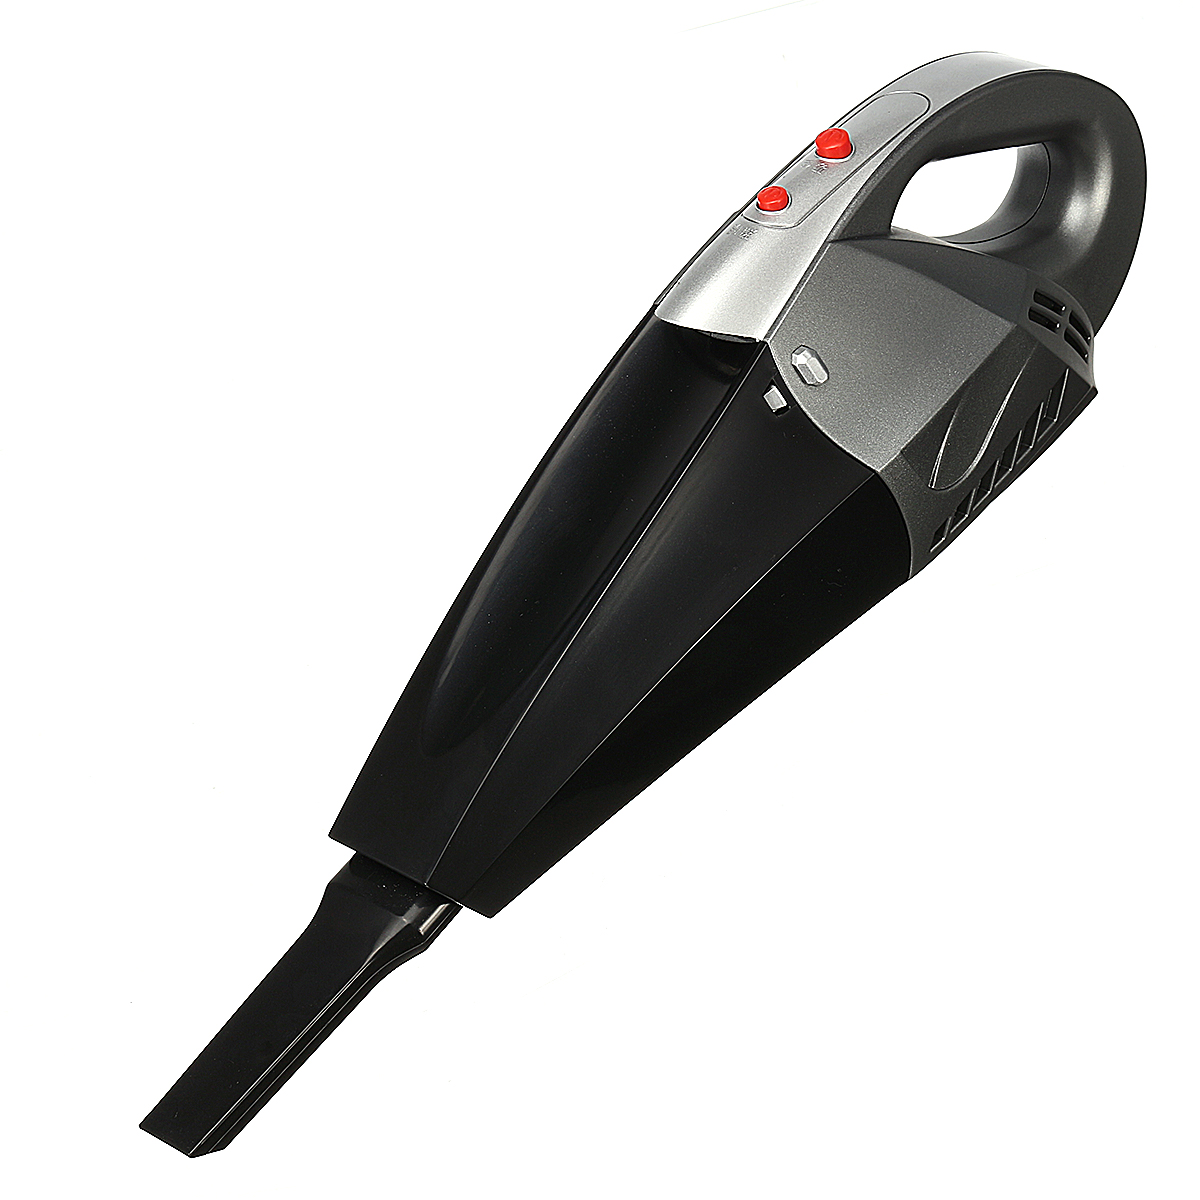 

120W Handheld Vacuum Cleaner Car Cordless Wireless Rechargeable Powerful Dust Collector Filter